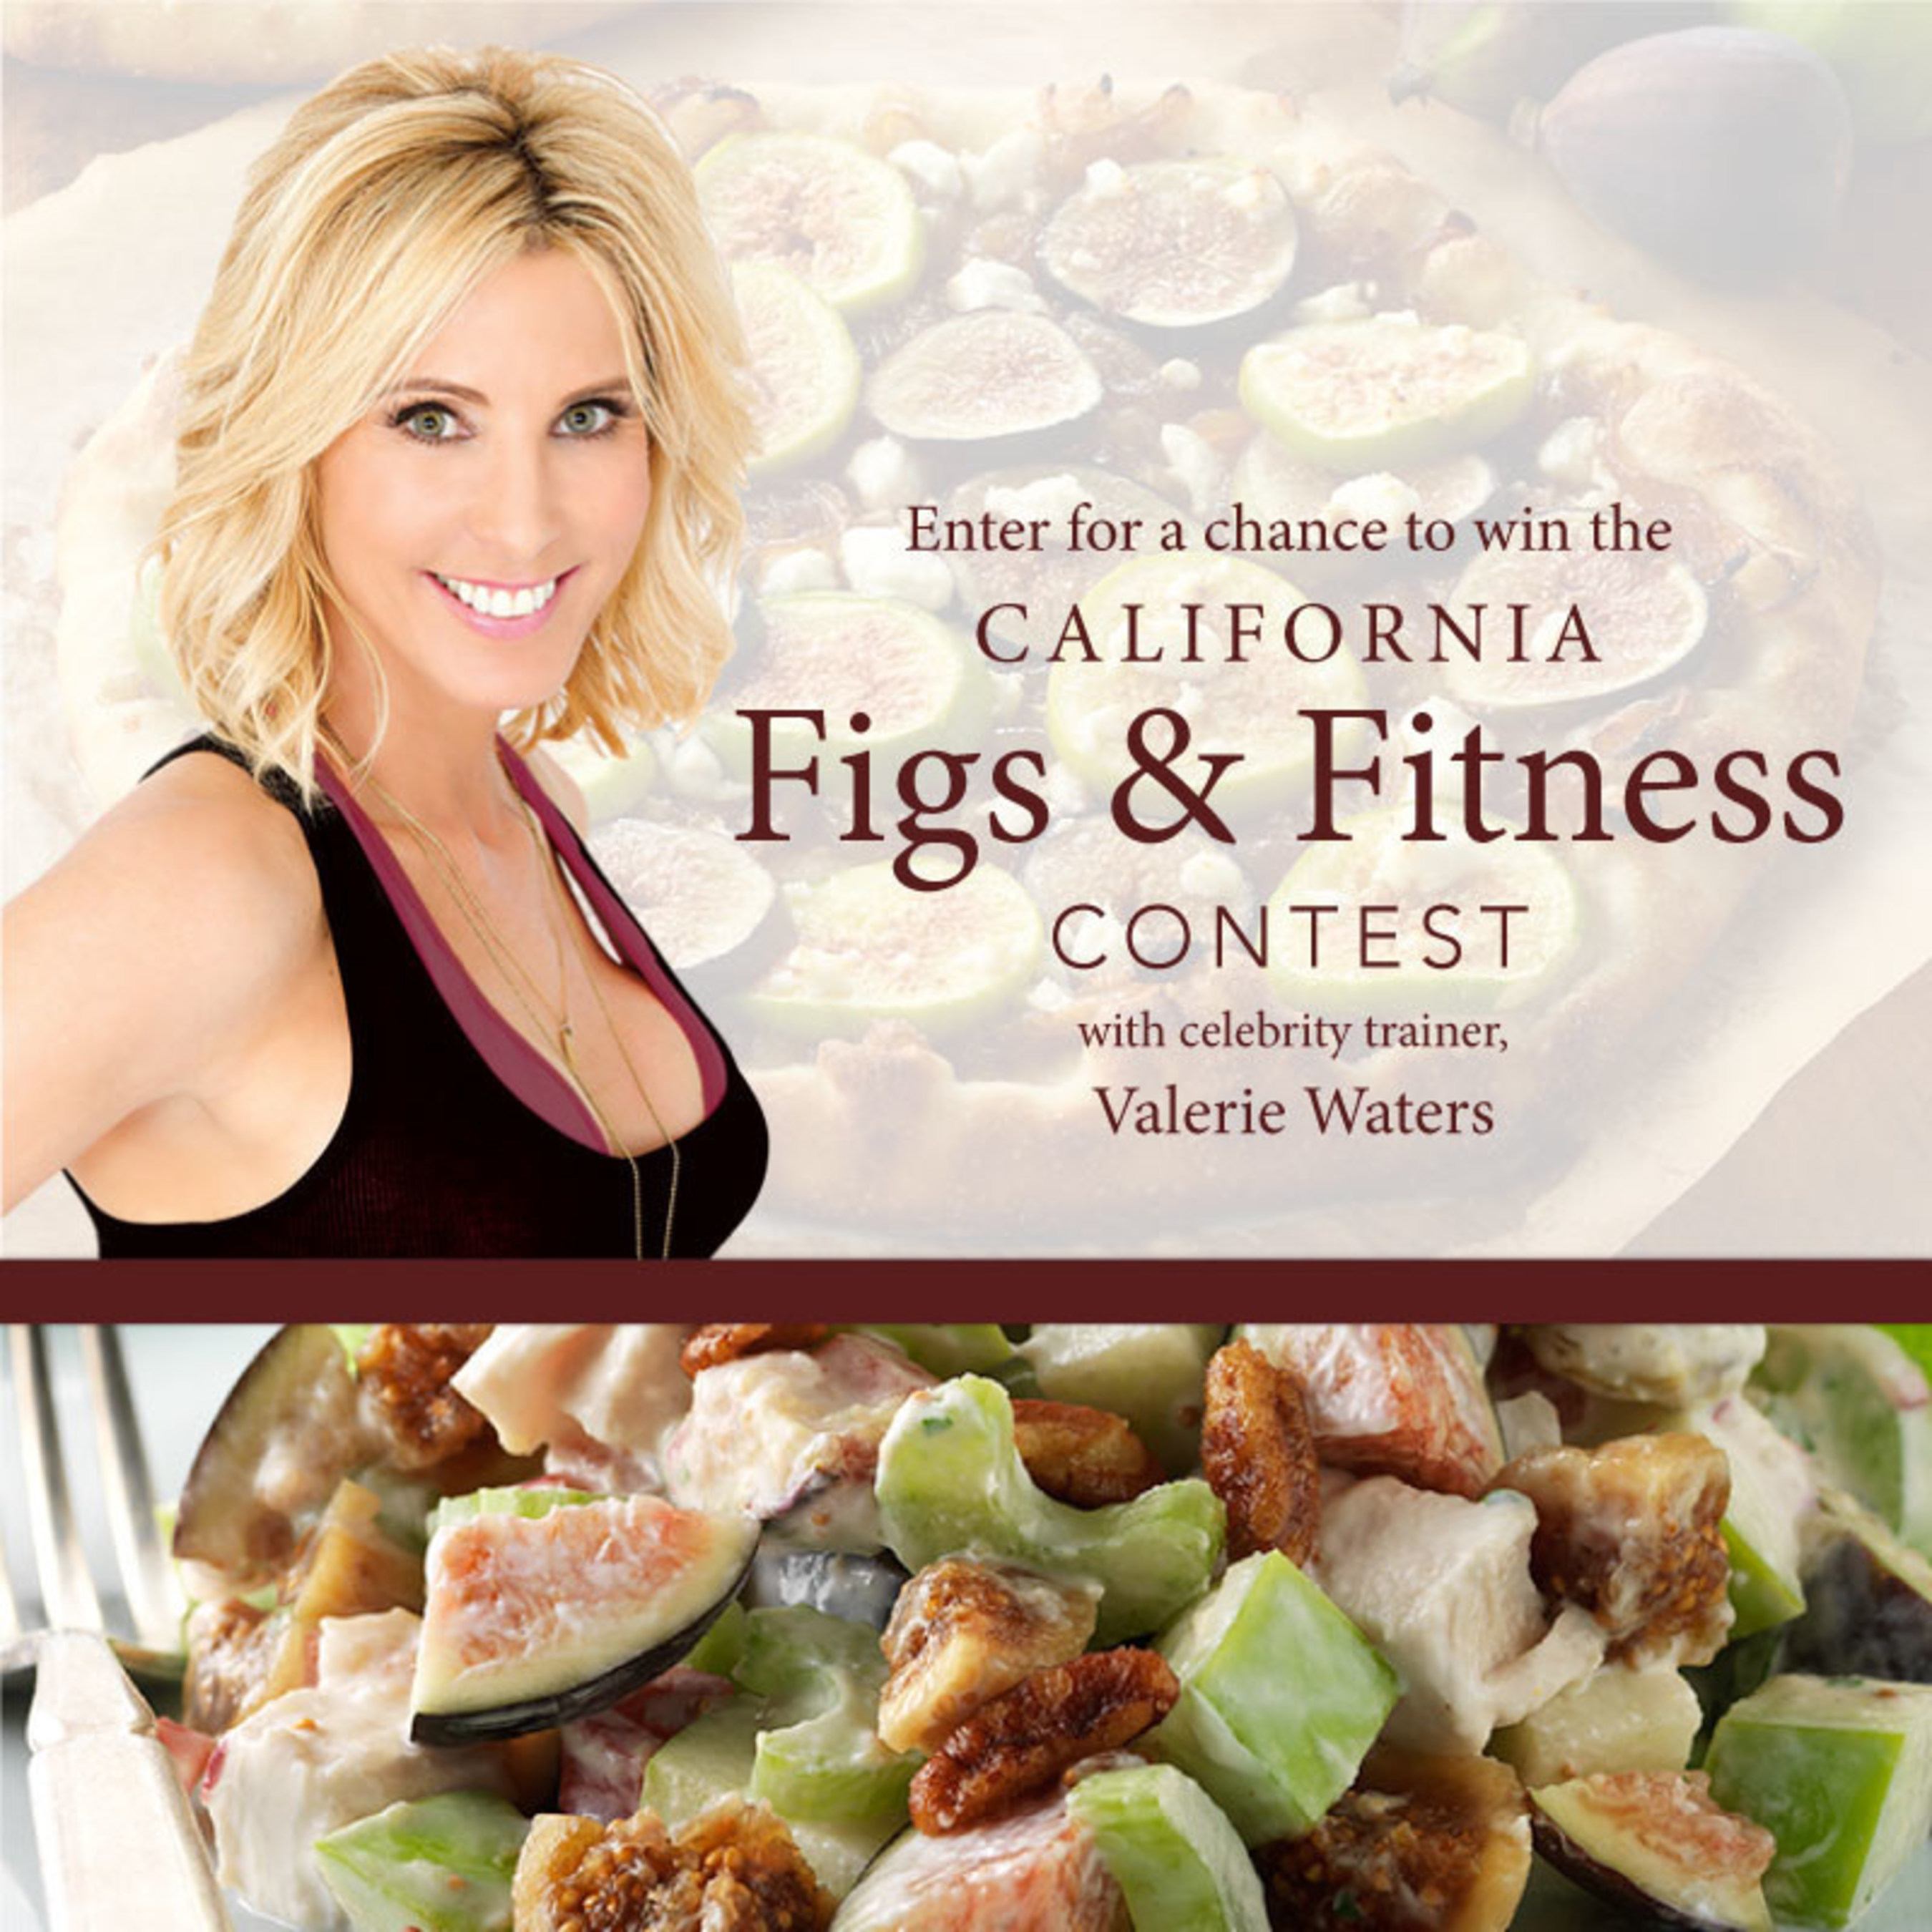 California Figs are a natural fit for celebrity fitness trainer Valerie Waters' healthy lifestyle.